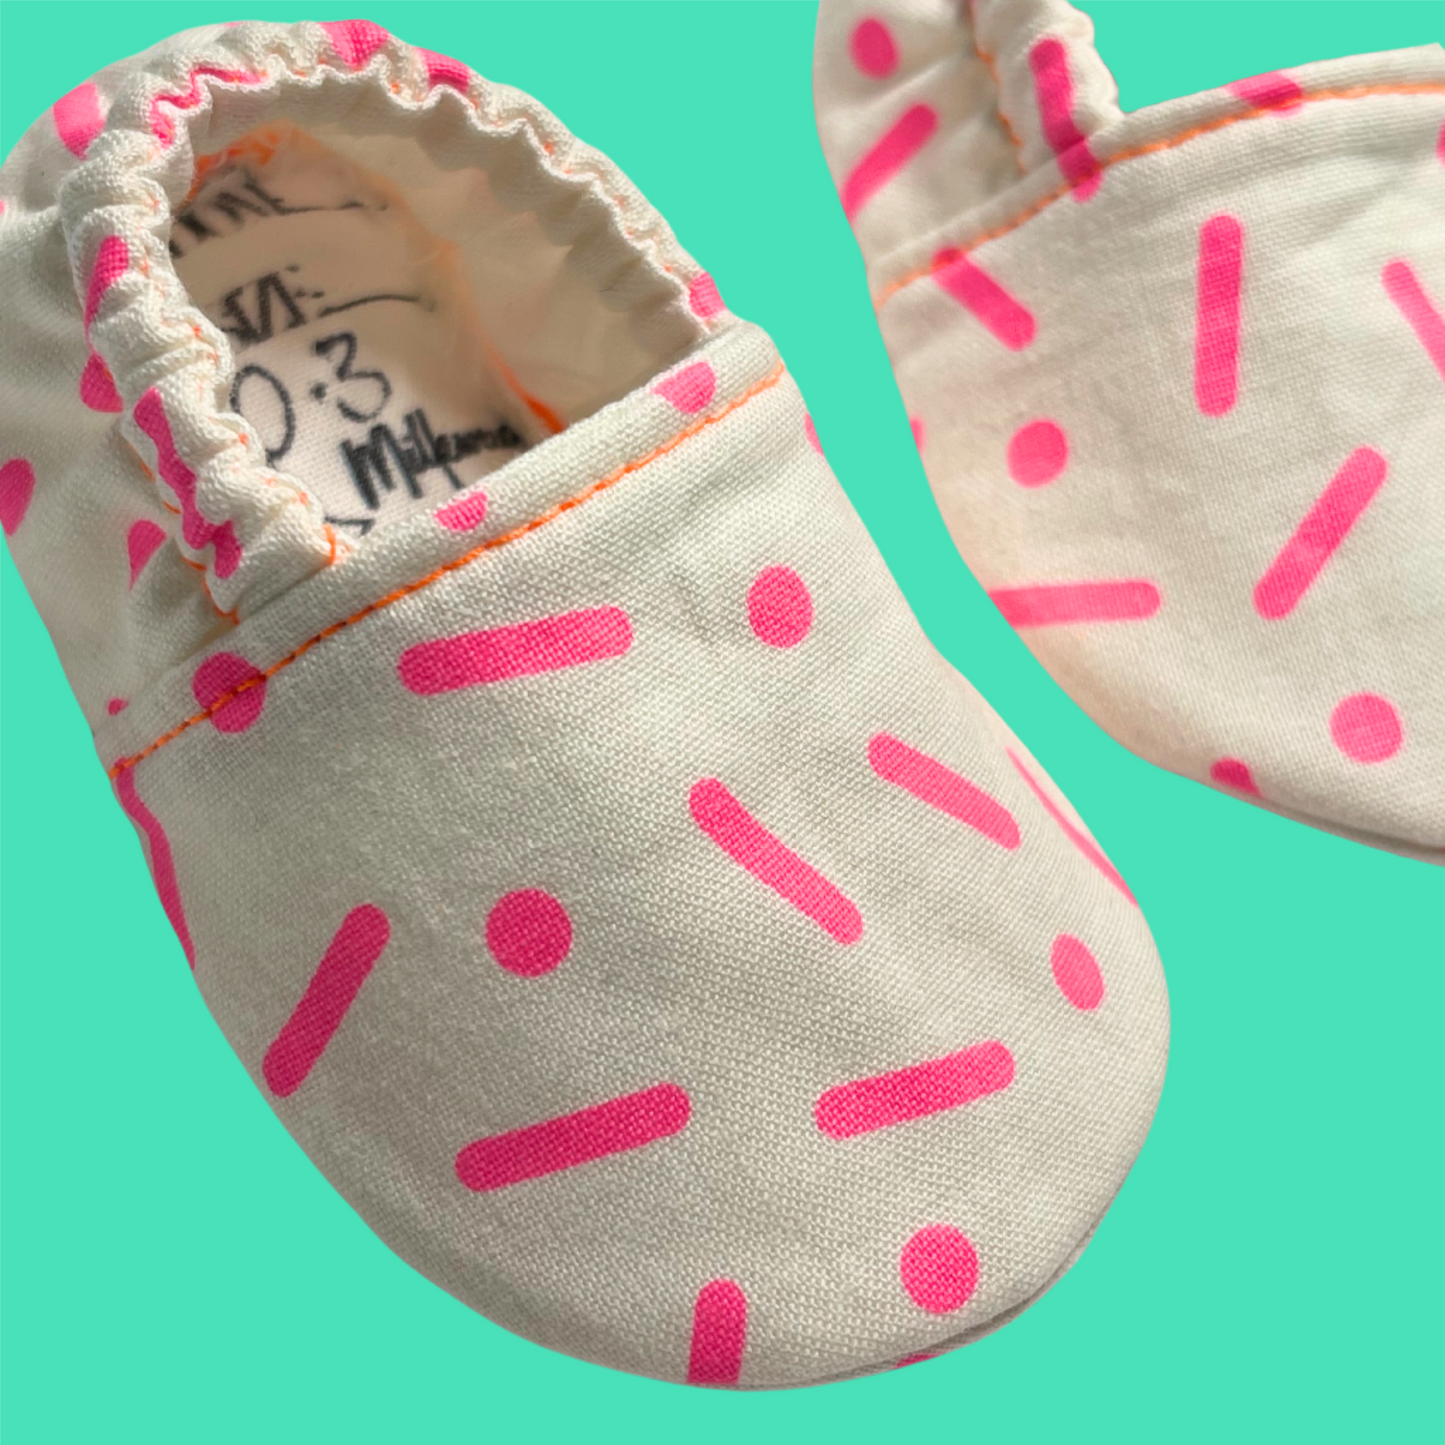 Neon Pink Sprinkle Soft Sole Baby Shoes | Handcrafted | Promotes Proper Foot Development | Ready to Ship